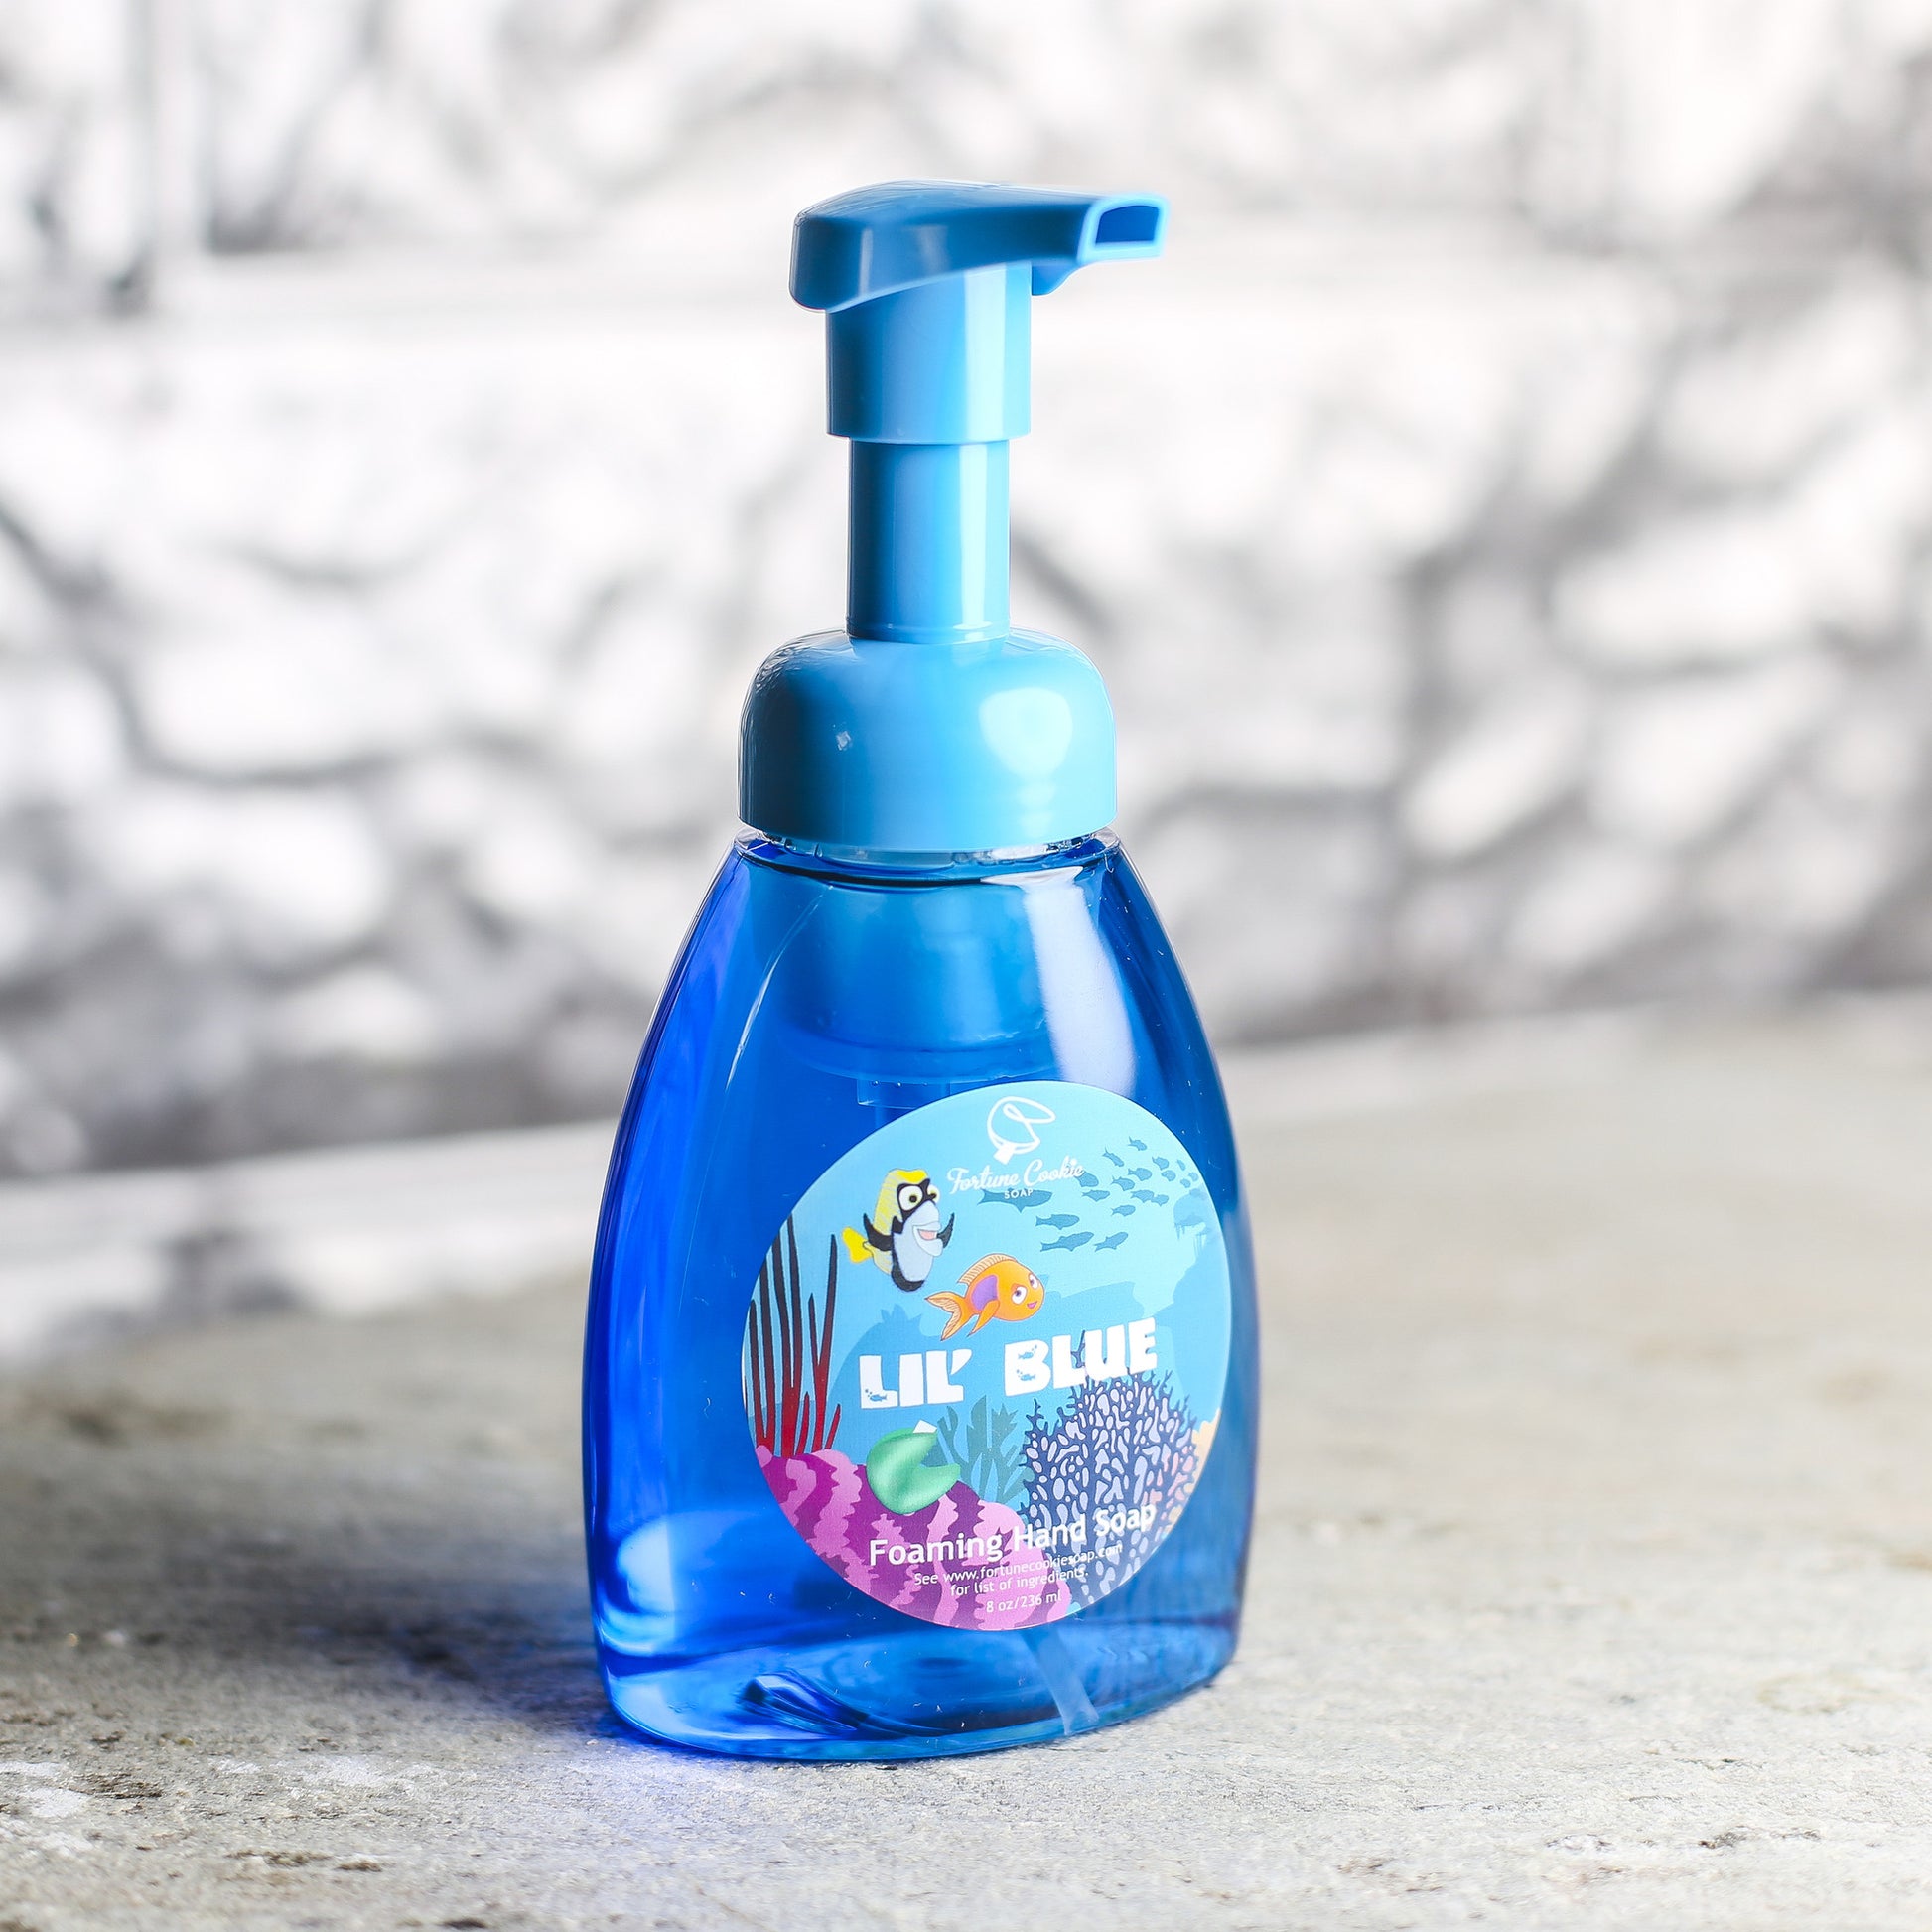 LIL' BLUE Foaming Hand Soap - Fortune Cookie Soap